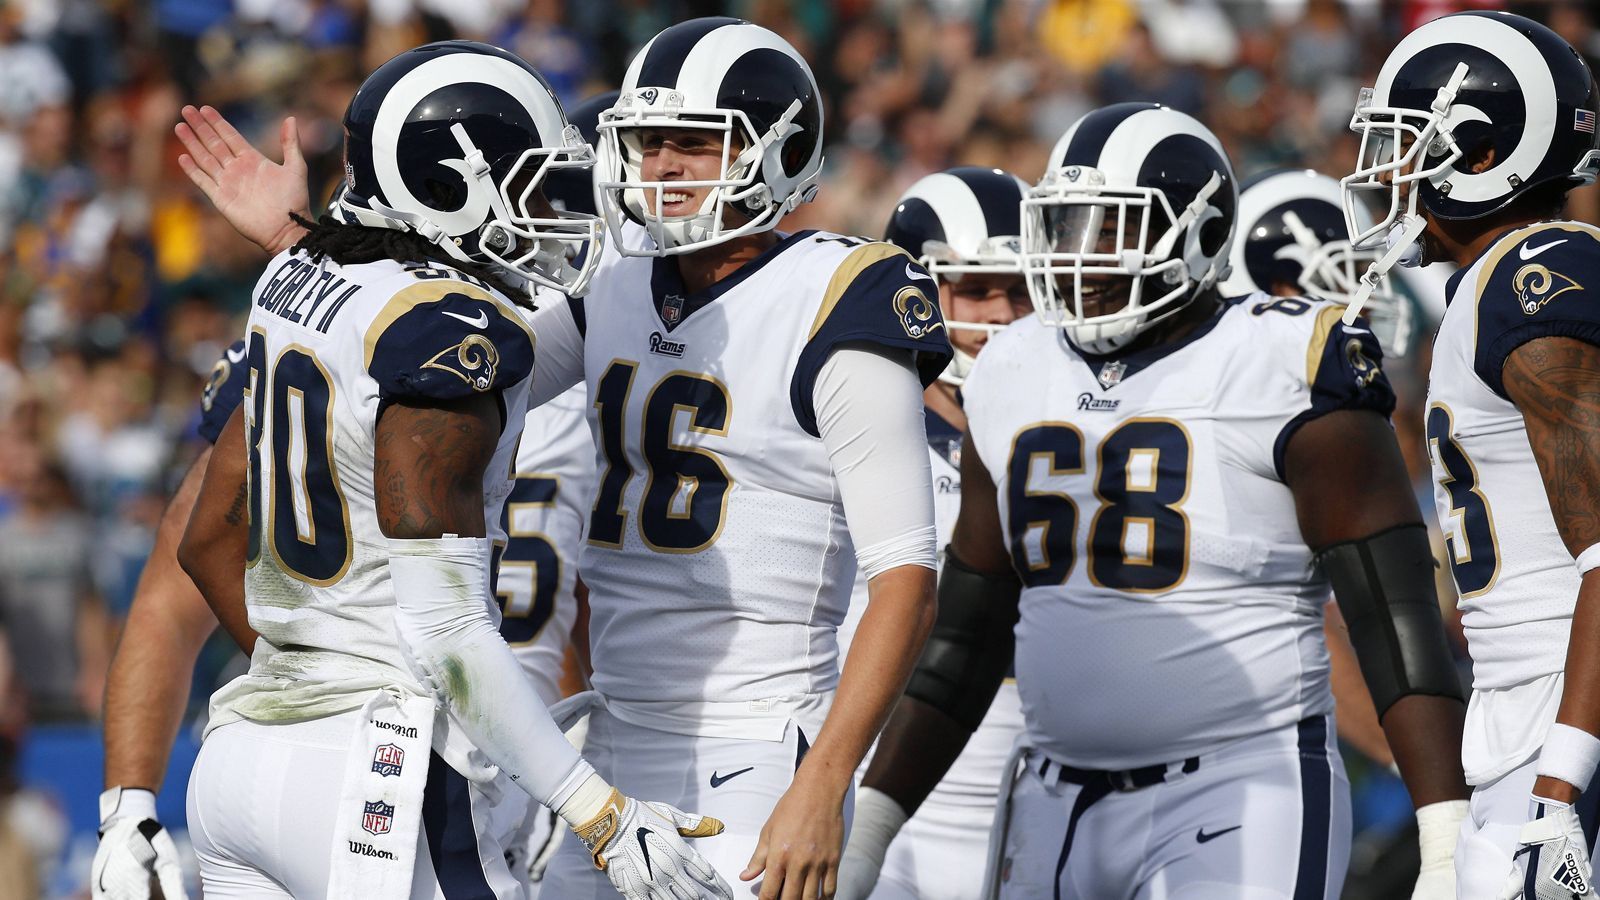 
                <strong>Los Angeles Rams (7 Spieler)</strong><br>
                6 Todd Gurley (RB), 7 Aaron Donald (DT), 38 Jared Goff (QB), 53 Aqib Talib (CB), 61 Ndamukong Suh (DT), 79 Marcus Peters (CB), 87 Andrew Whitworth (OT)
              